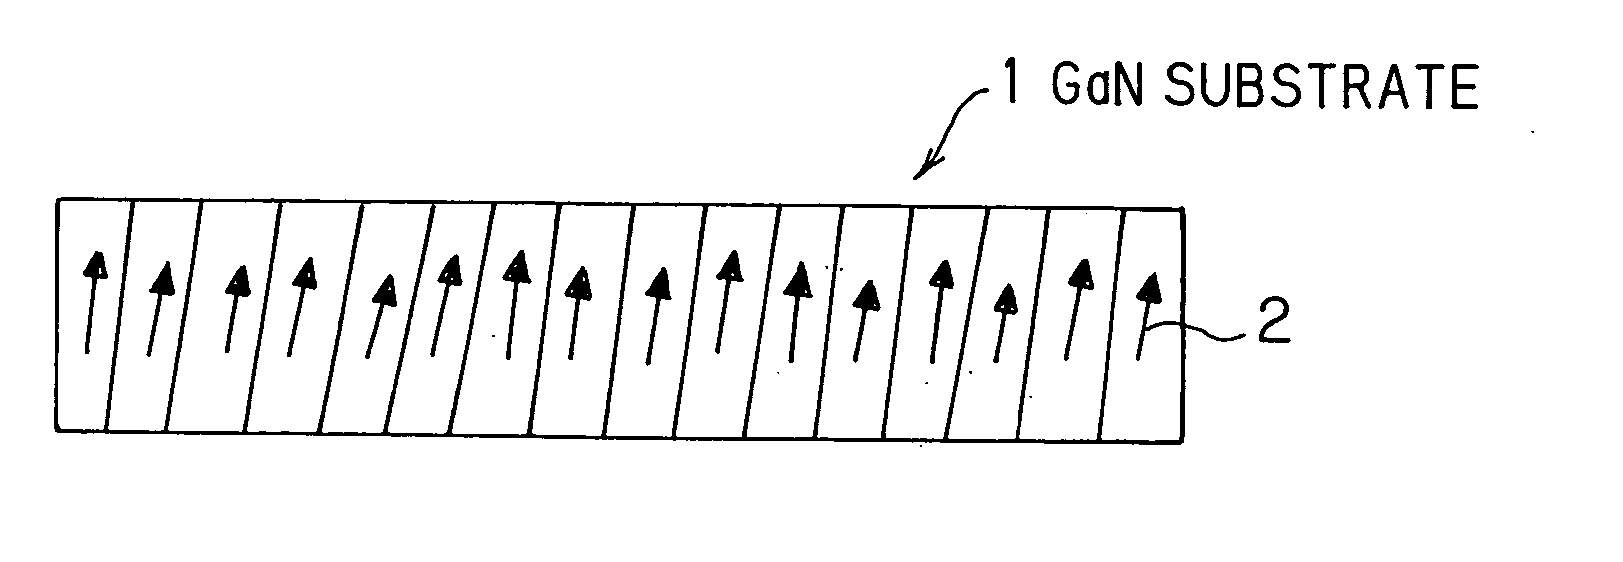 III-V group nitride system semiconductor substrate